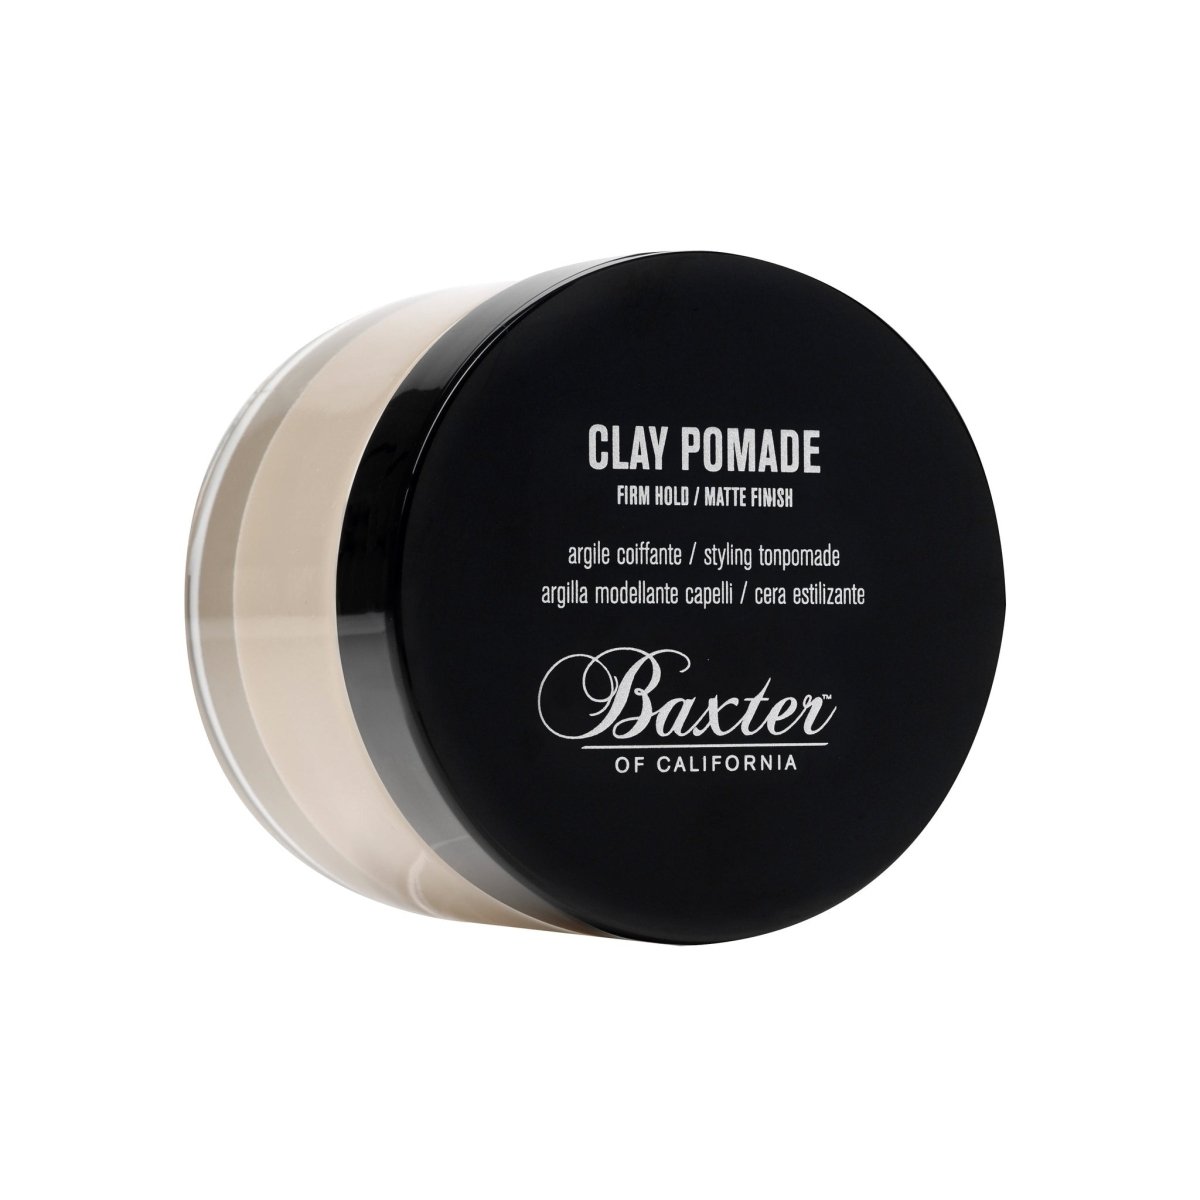 Image of Baxter of California Clay Pomade Firm Hold